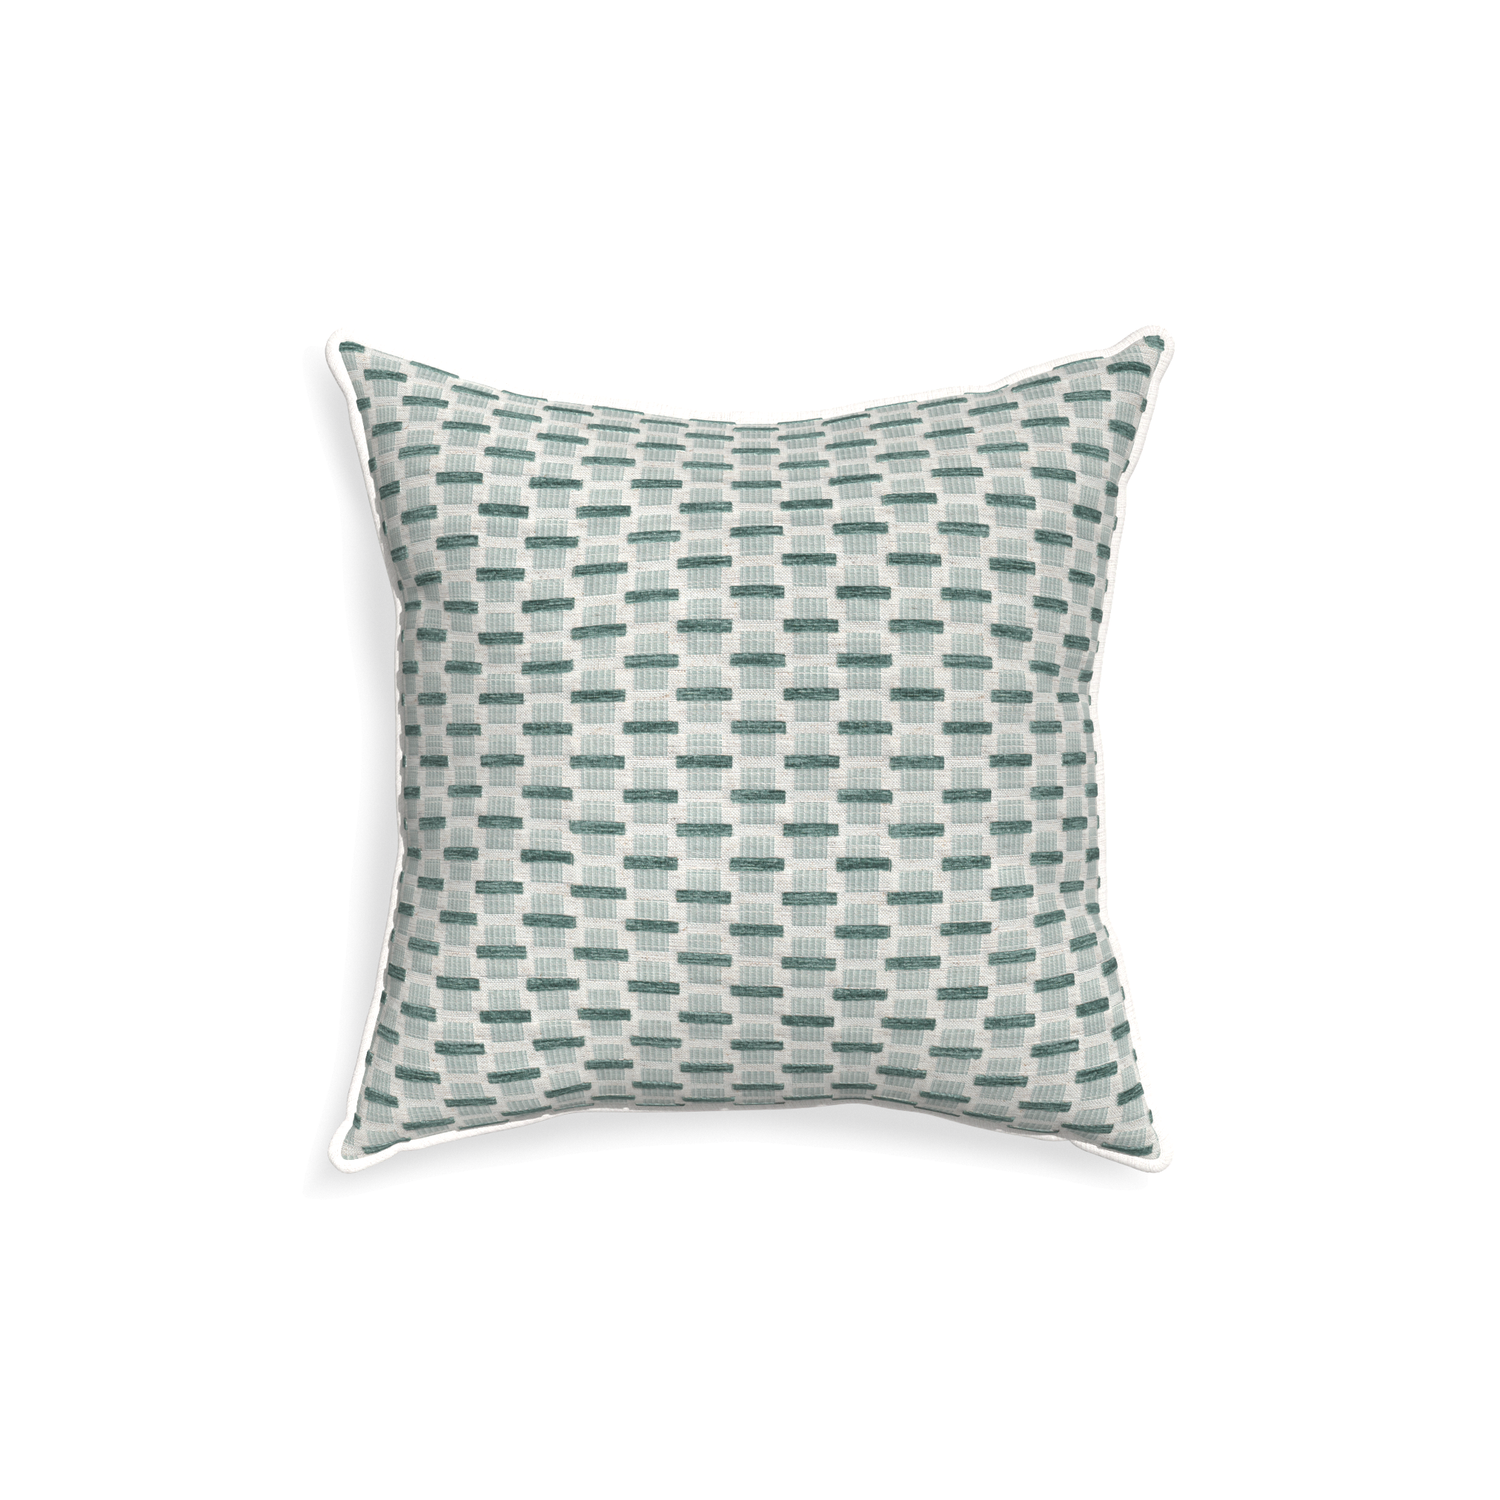 18-square willow mint custom green geometric chenillepillow with snow piping on white background